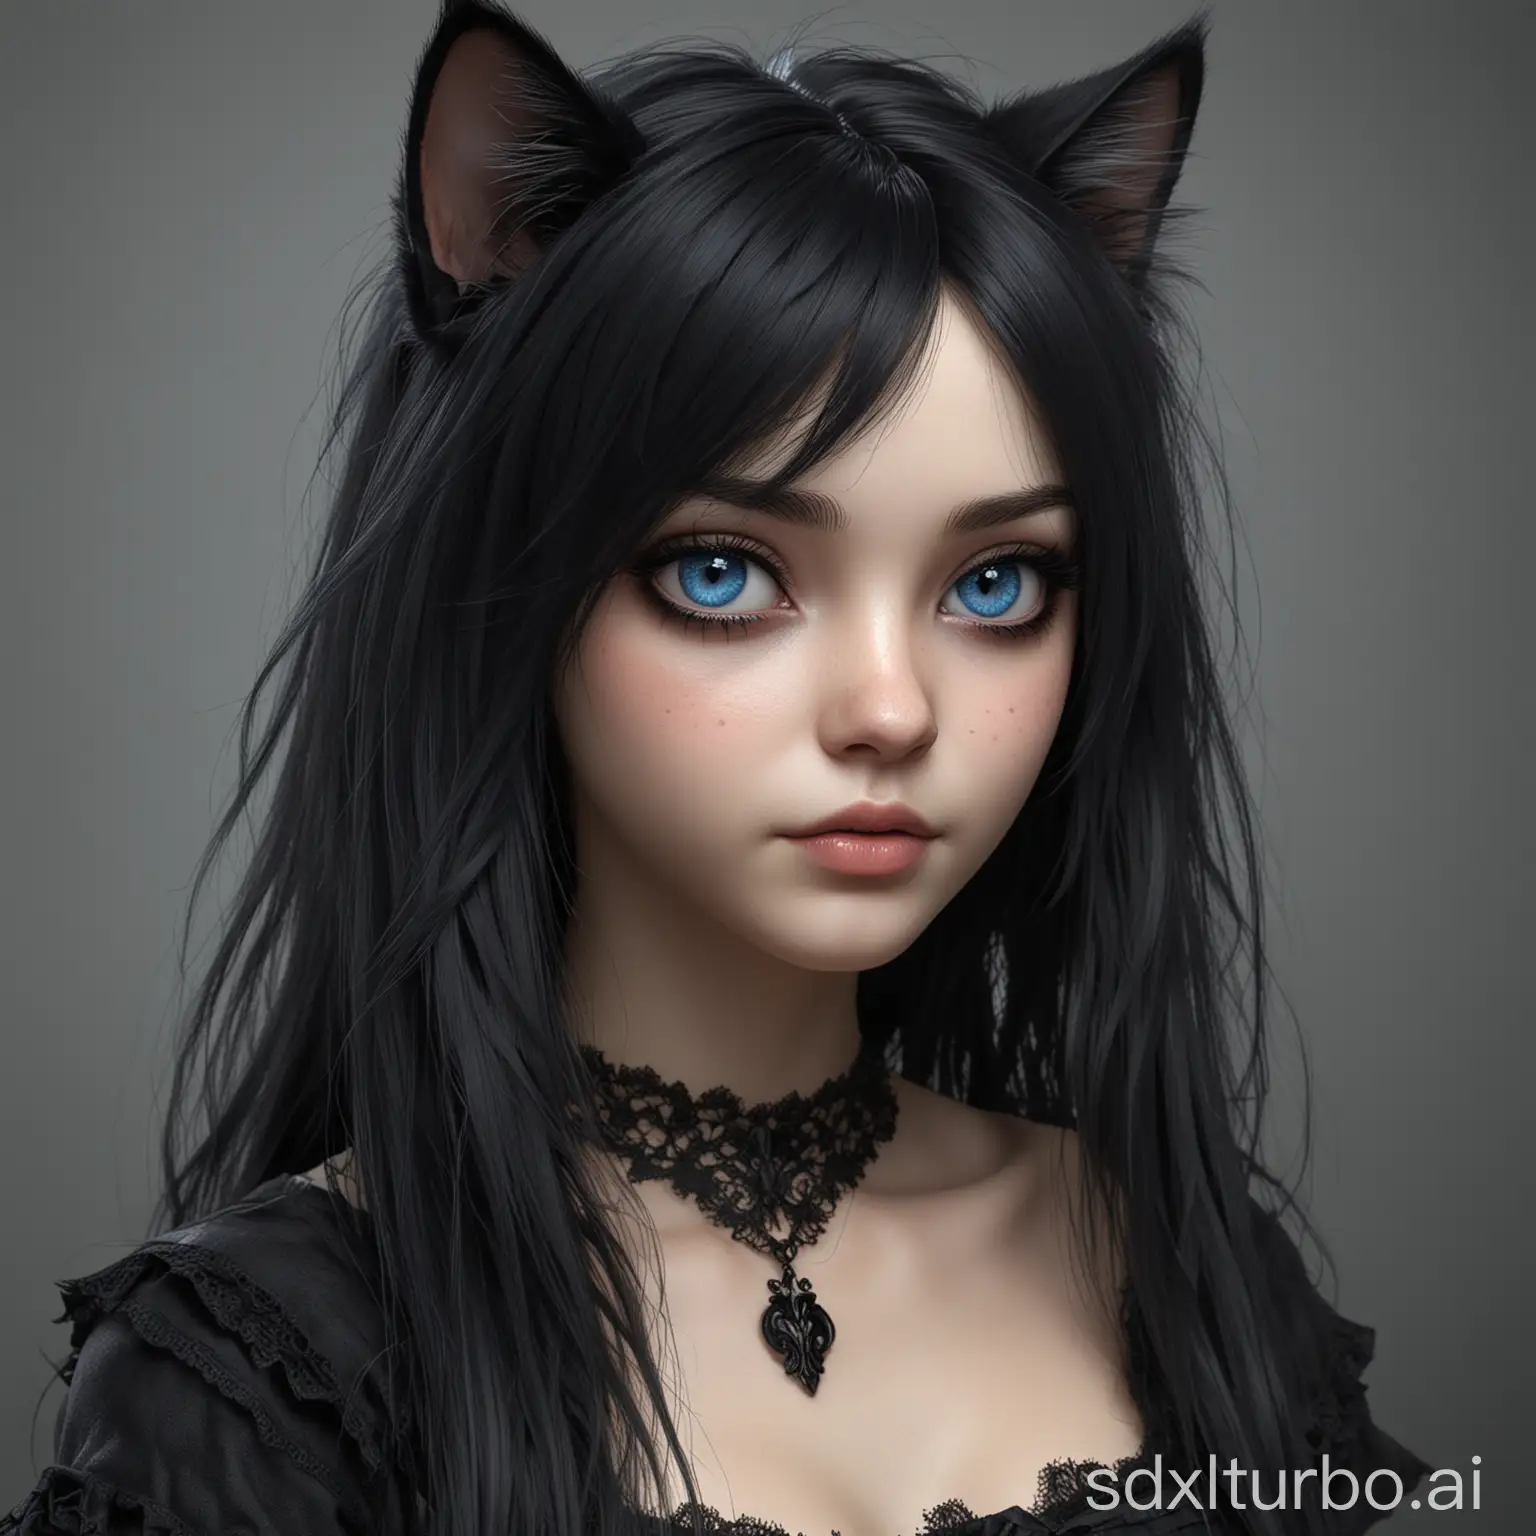 a photorealistic, furry cat-girl, with black hair, and blue eyes, she is in gothic style, she looks less anime or cartoon-like, she looks more real-world like